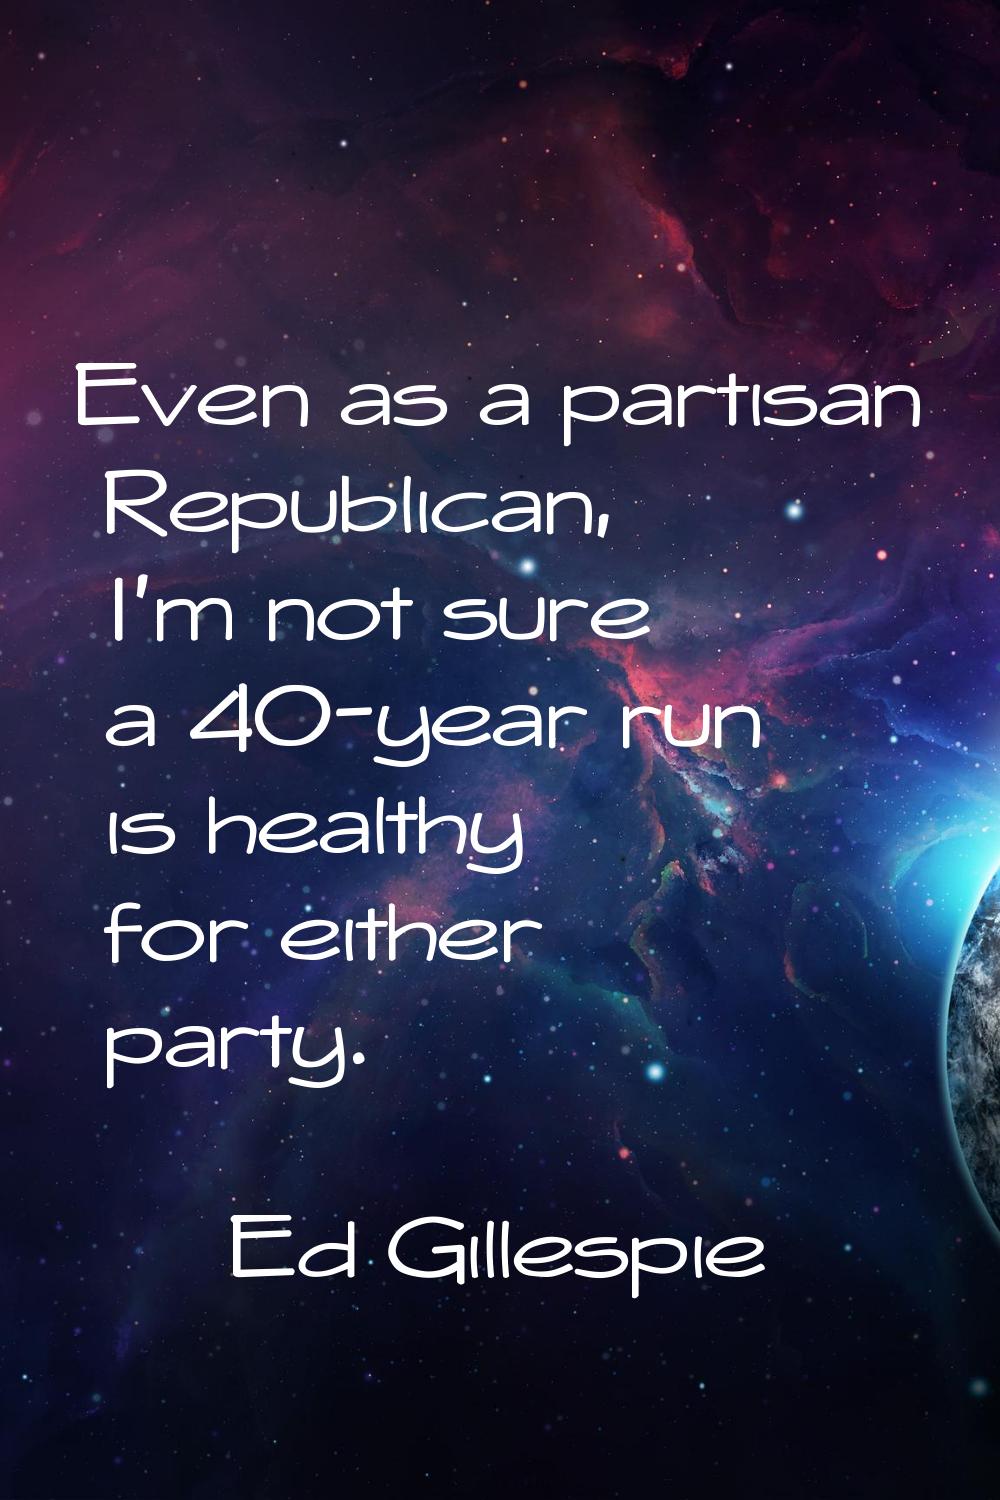 Even as a partisan Republican, I'm not sure a 40-year run is healthy for either party.